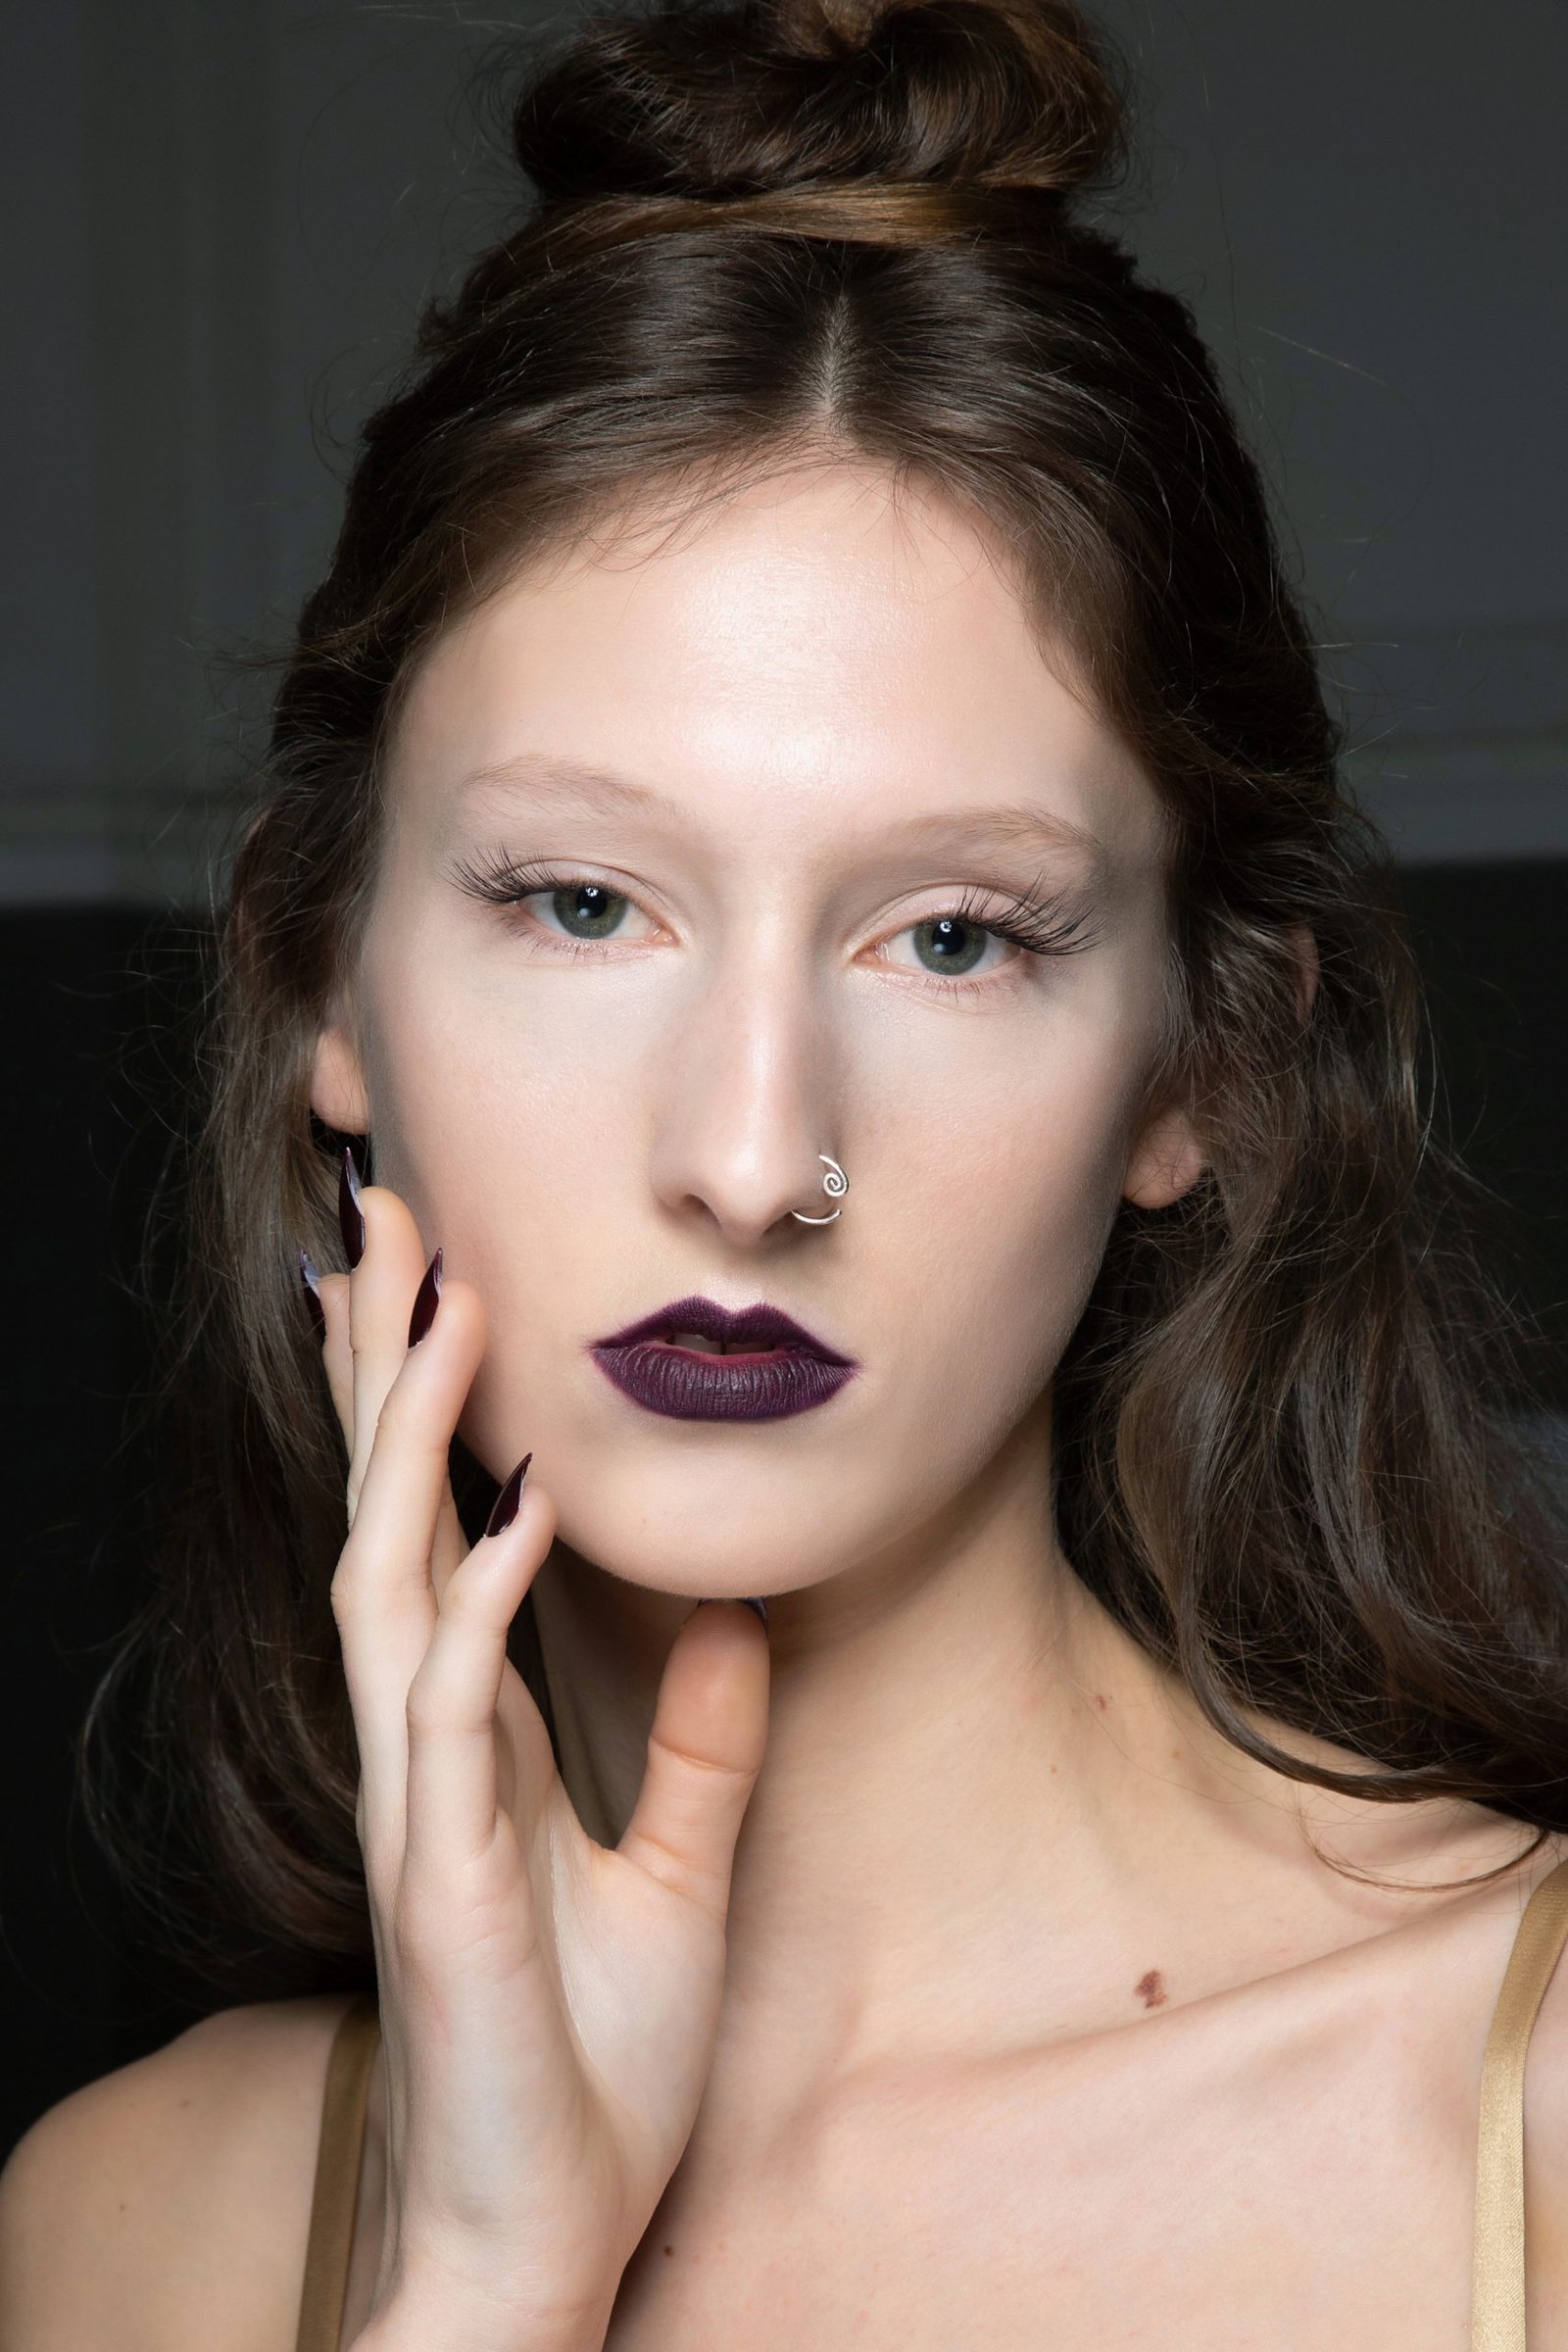 The Hottest Fall Nail Trends for 2020 Include New Nudes and Vampy Hues